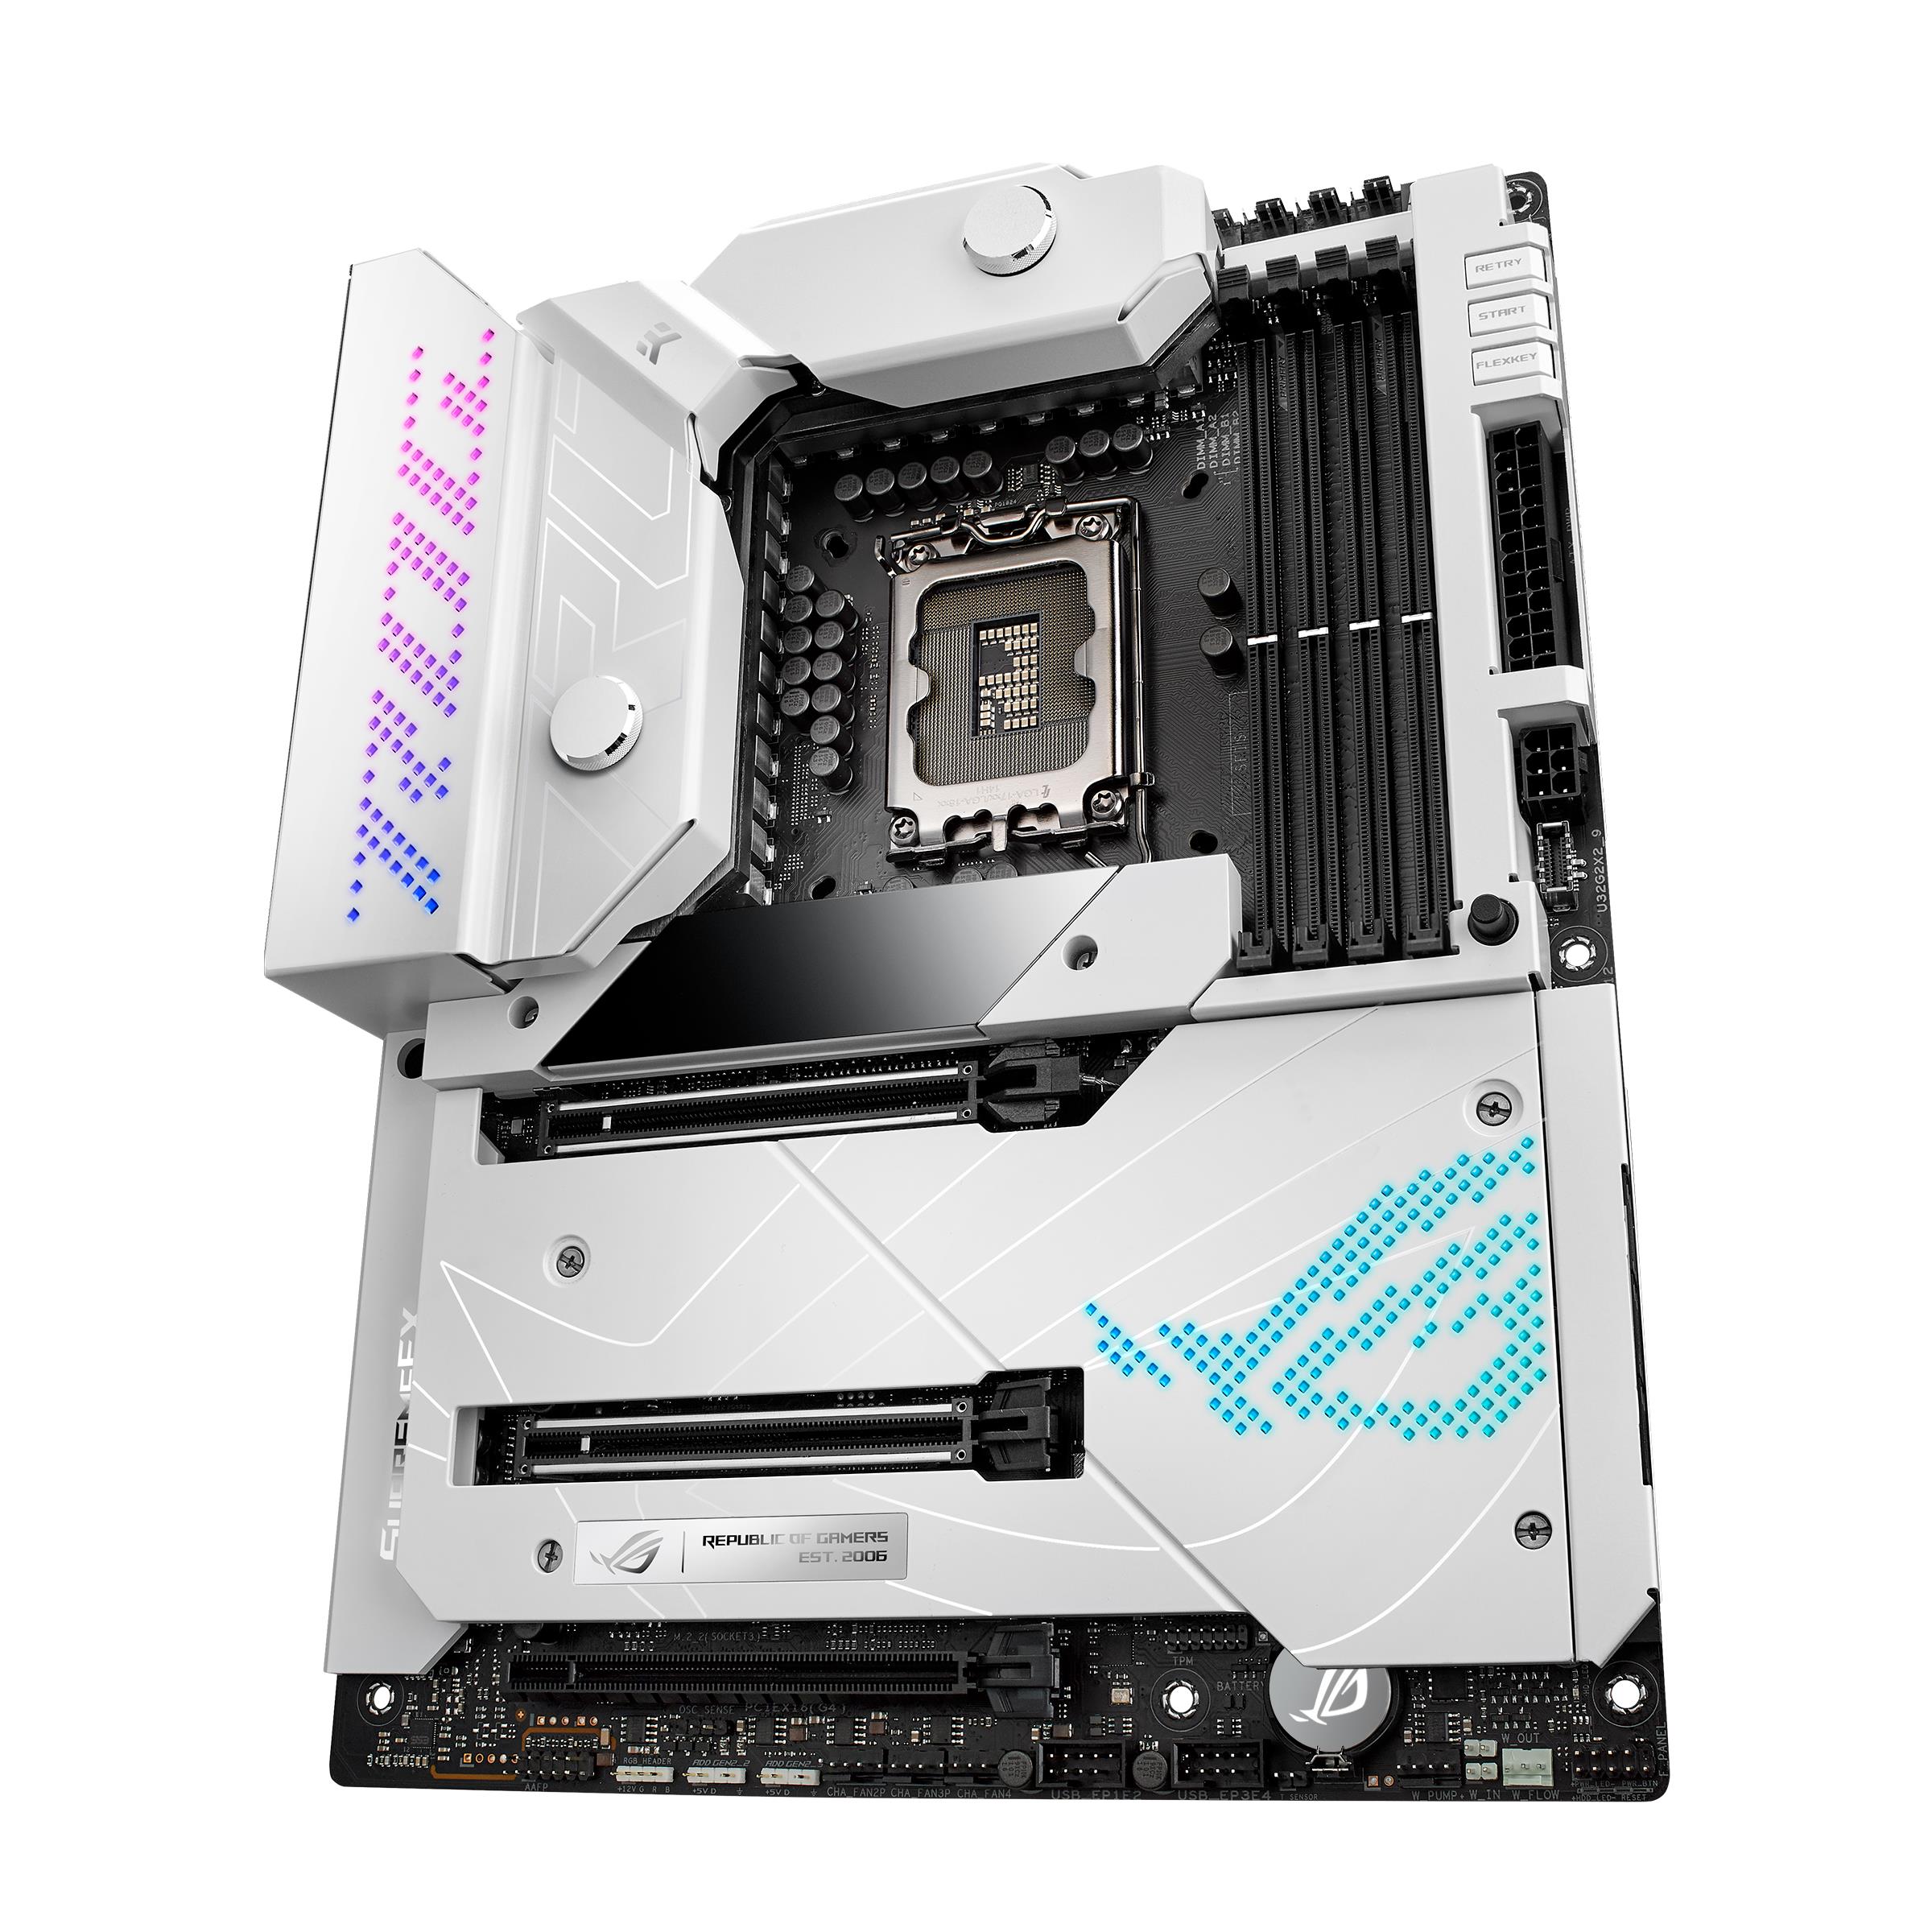 A large marketing image providing additional information about the product ASUS ROG Maximus Z690 Formula LGA1700 ATX Desktop Motherboard - Additional alt info not provided